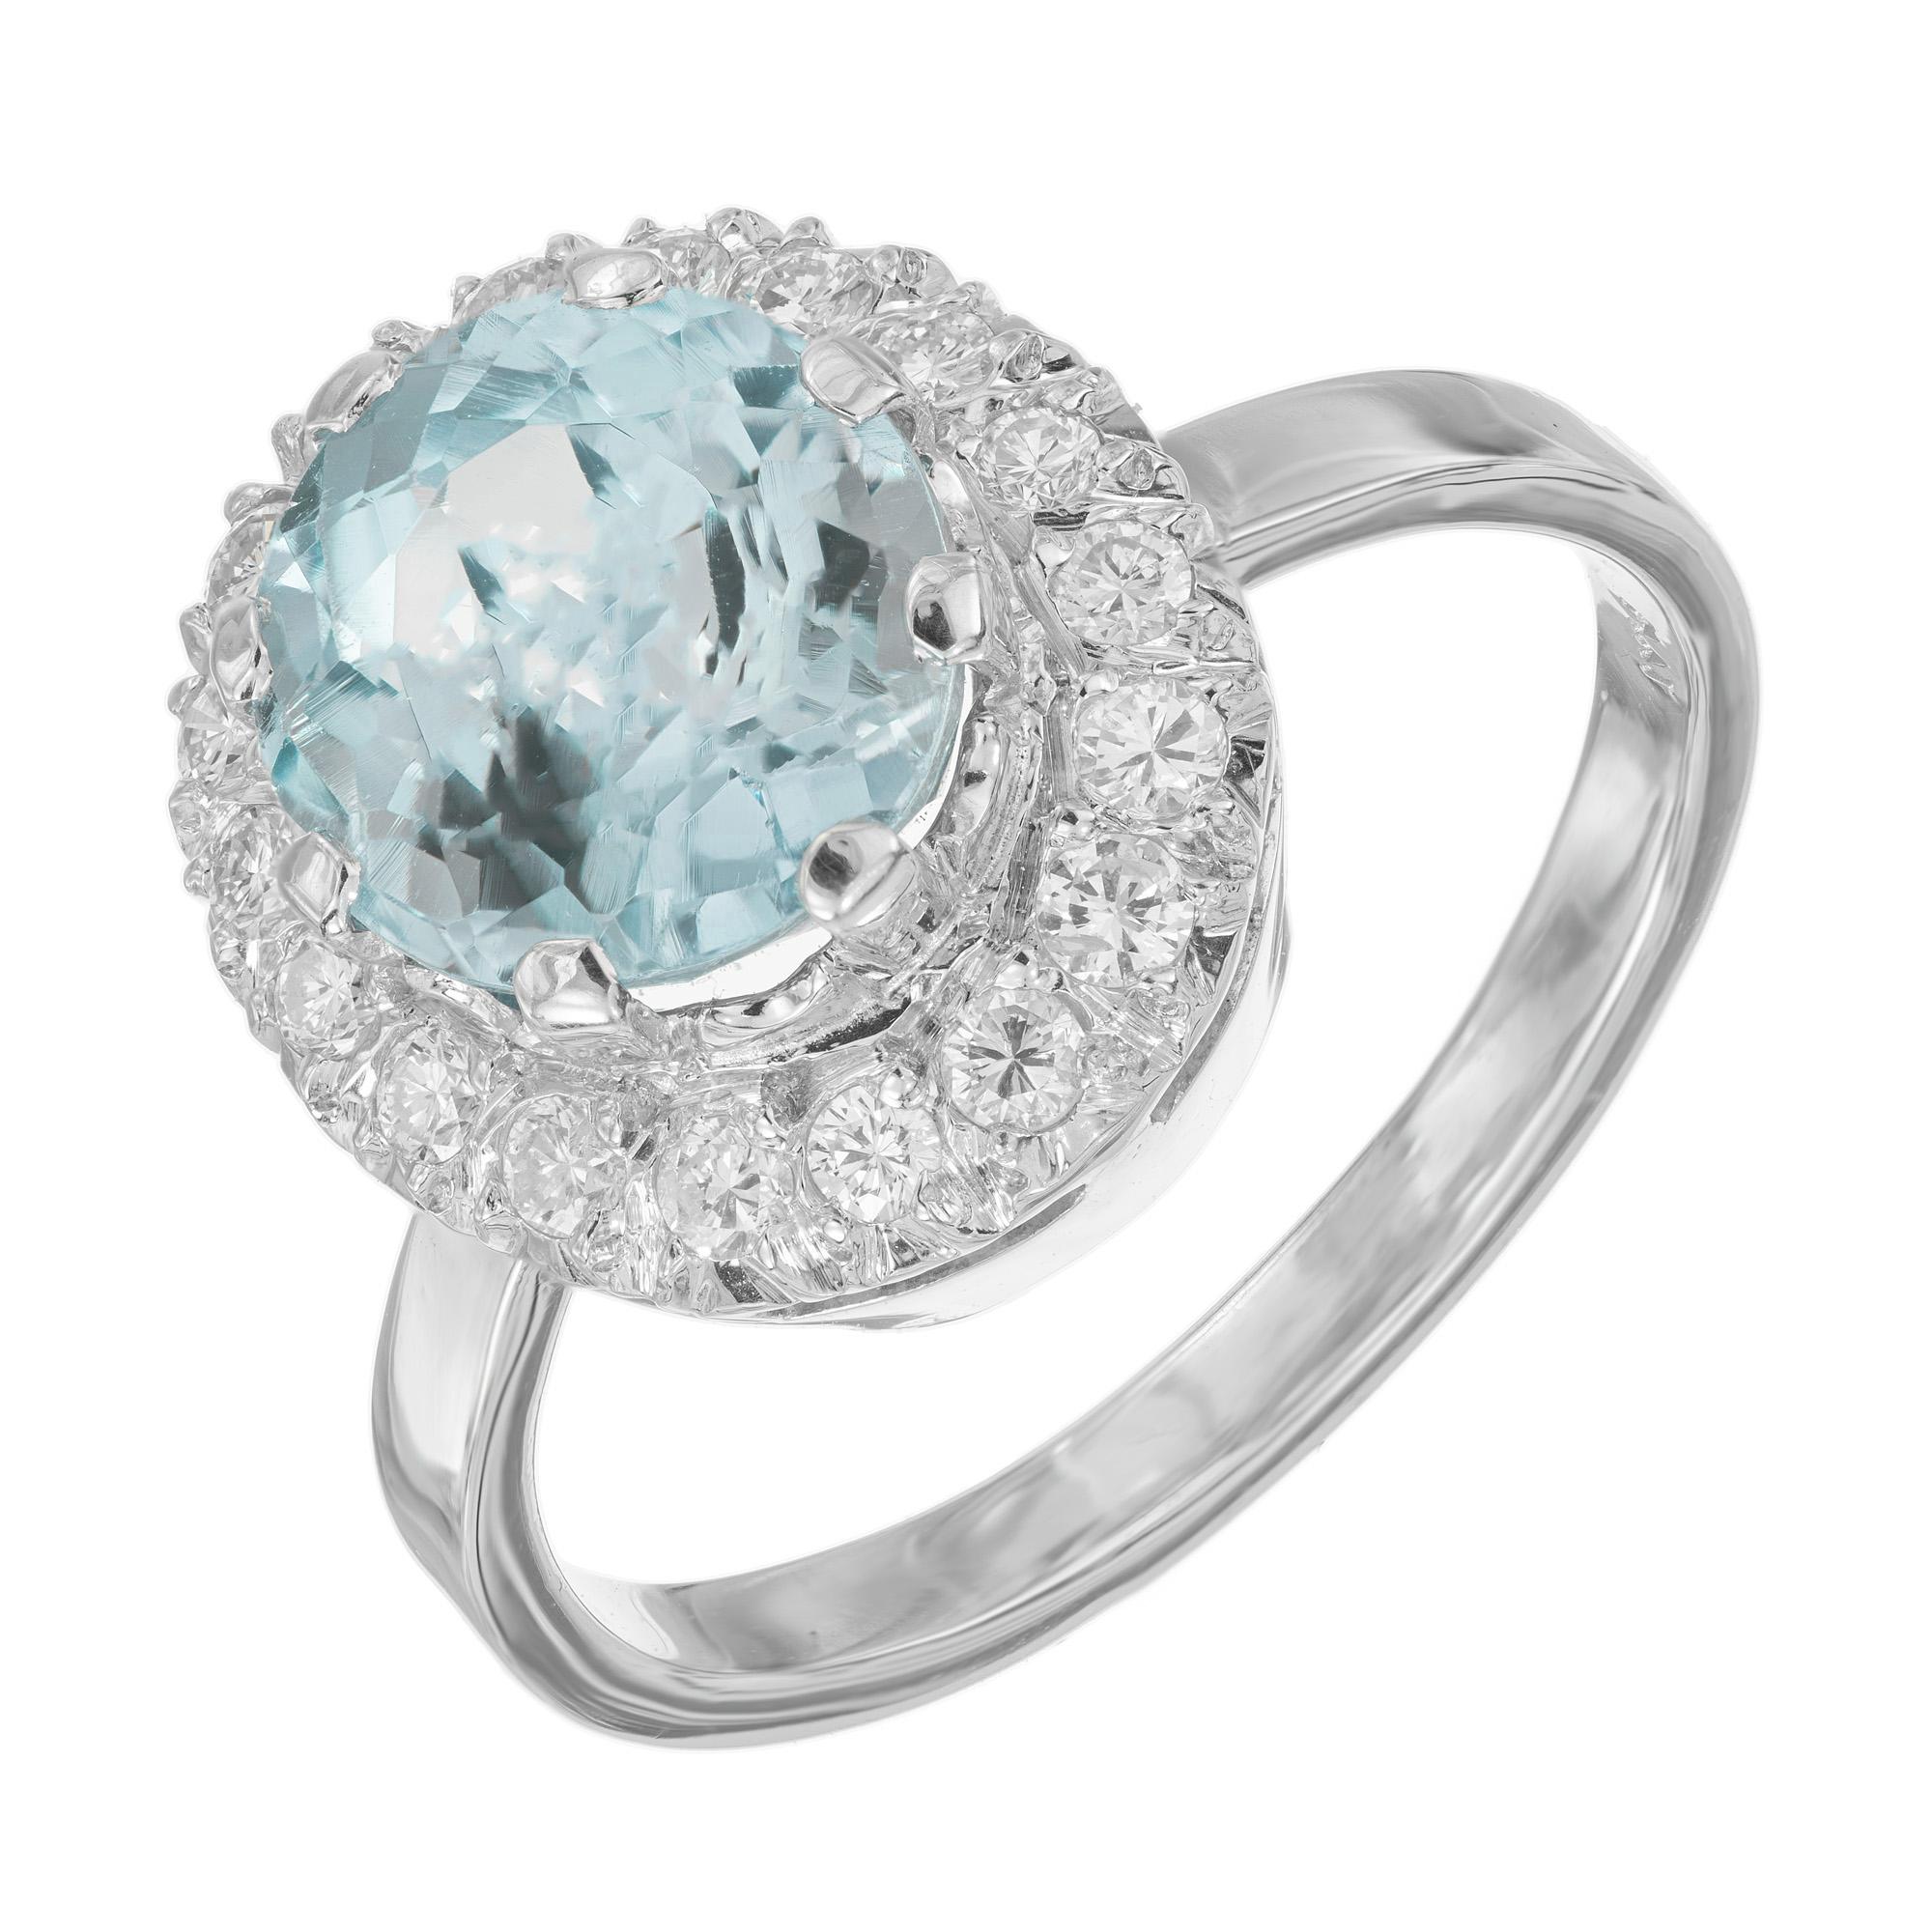 Vintage 1950's oval Aquamarine Diamond White Gold Halo Ring. The centerpiece of this ring features a mesmerizing 2.3 carat oval aquamarine, known for its captivating blue hue. Mounted in a platinum setting and encircled by a halo of 18 dazzling